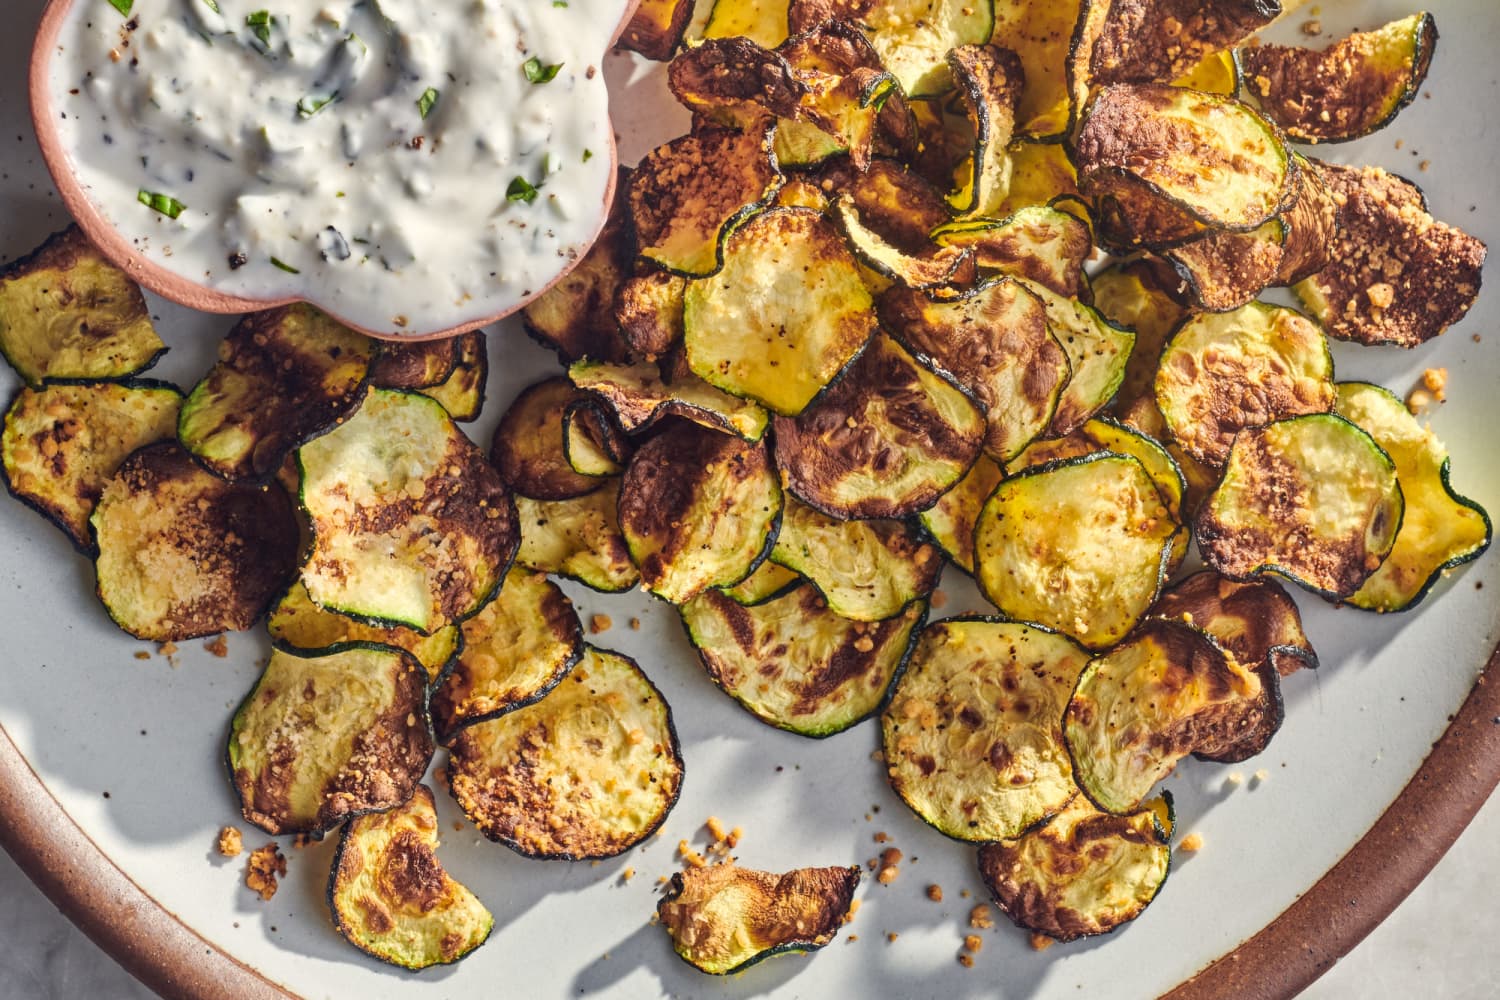 Air-Fryer Zucchini Chips + More Healthy Air-Fryer Recipes